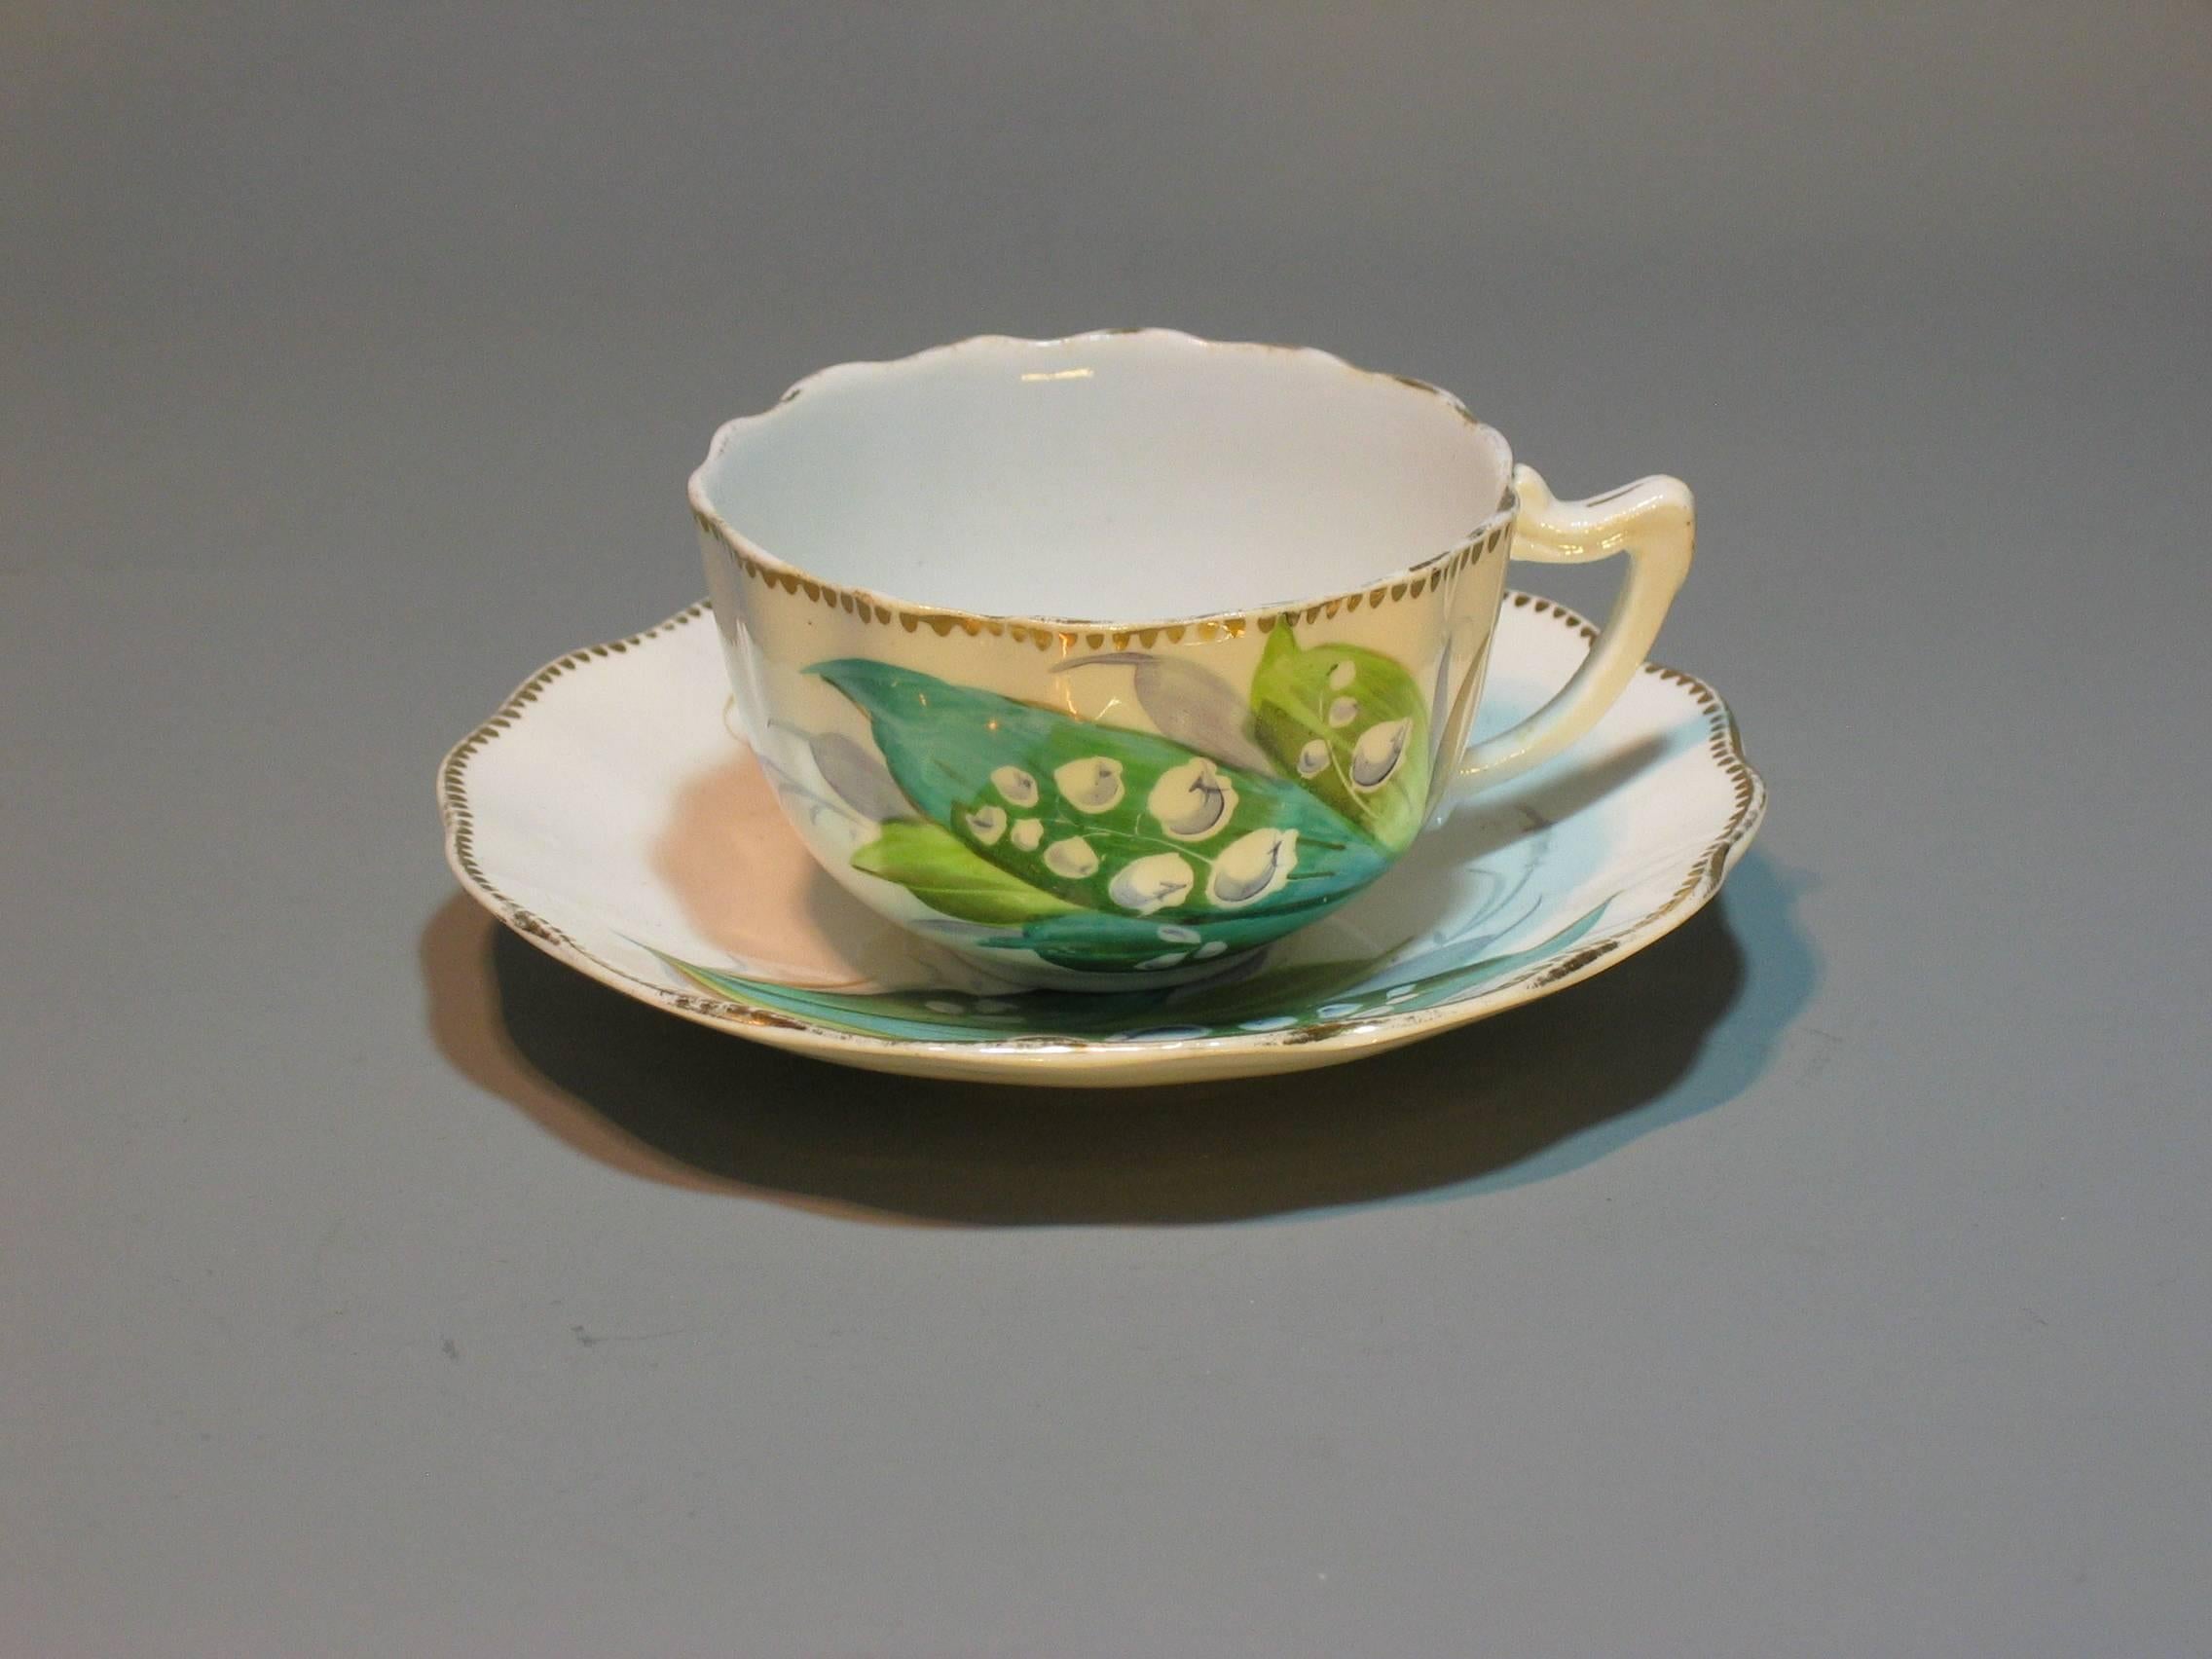 Staffordshire Porcelain Part Tea and Dessert Service, First Half of 19th Century 1